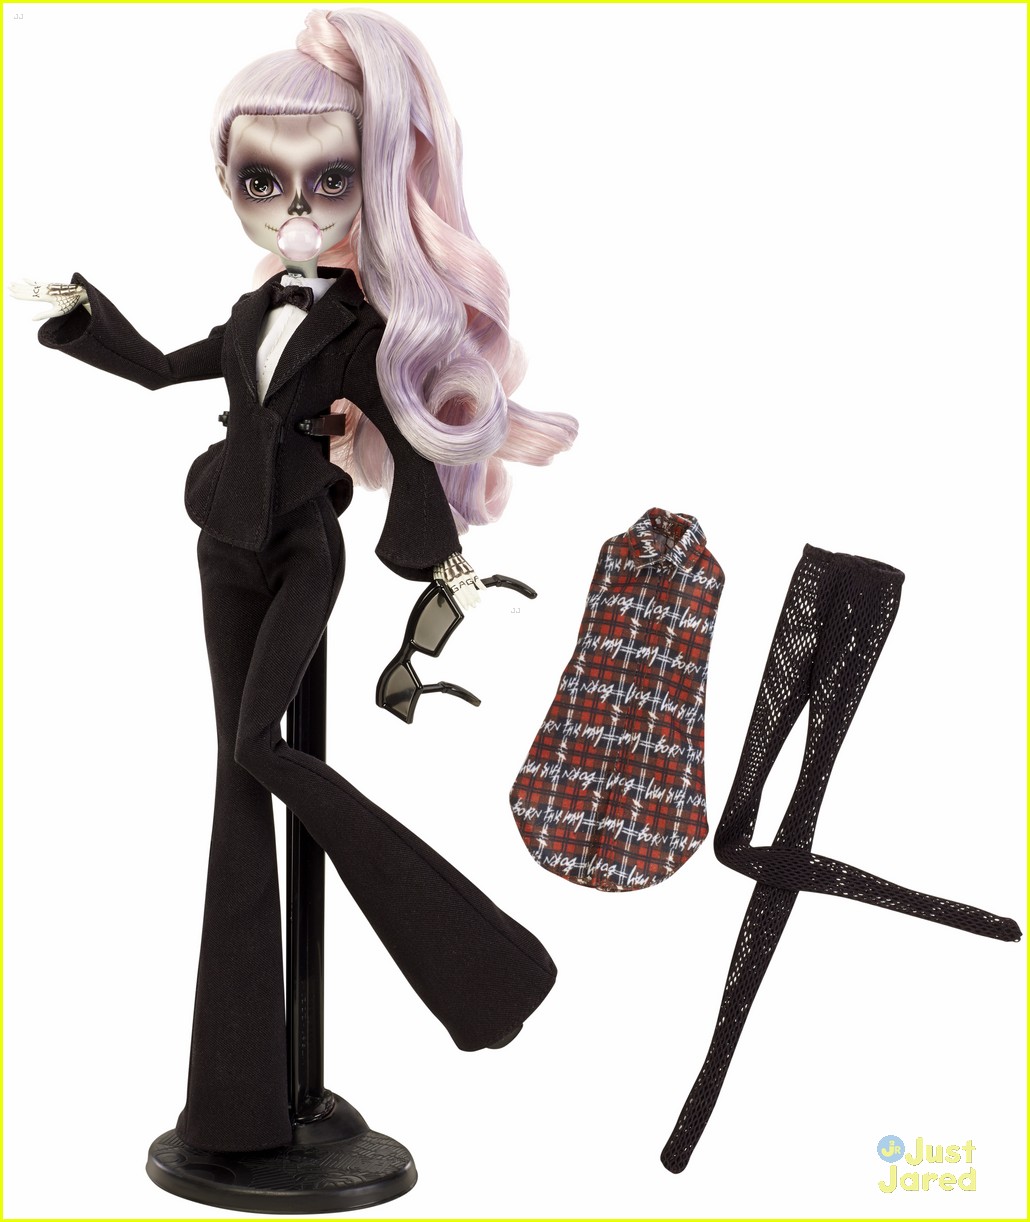 lady gaga monster high doll up close details 01